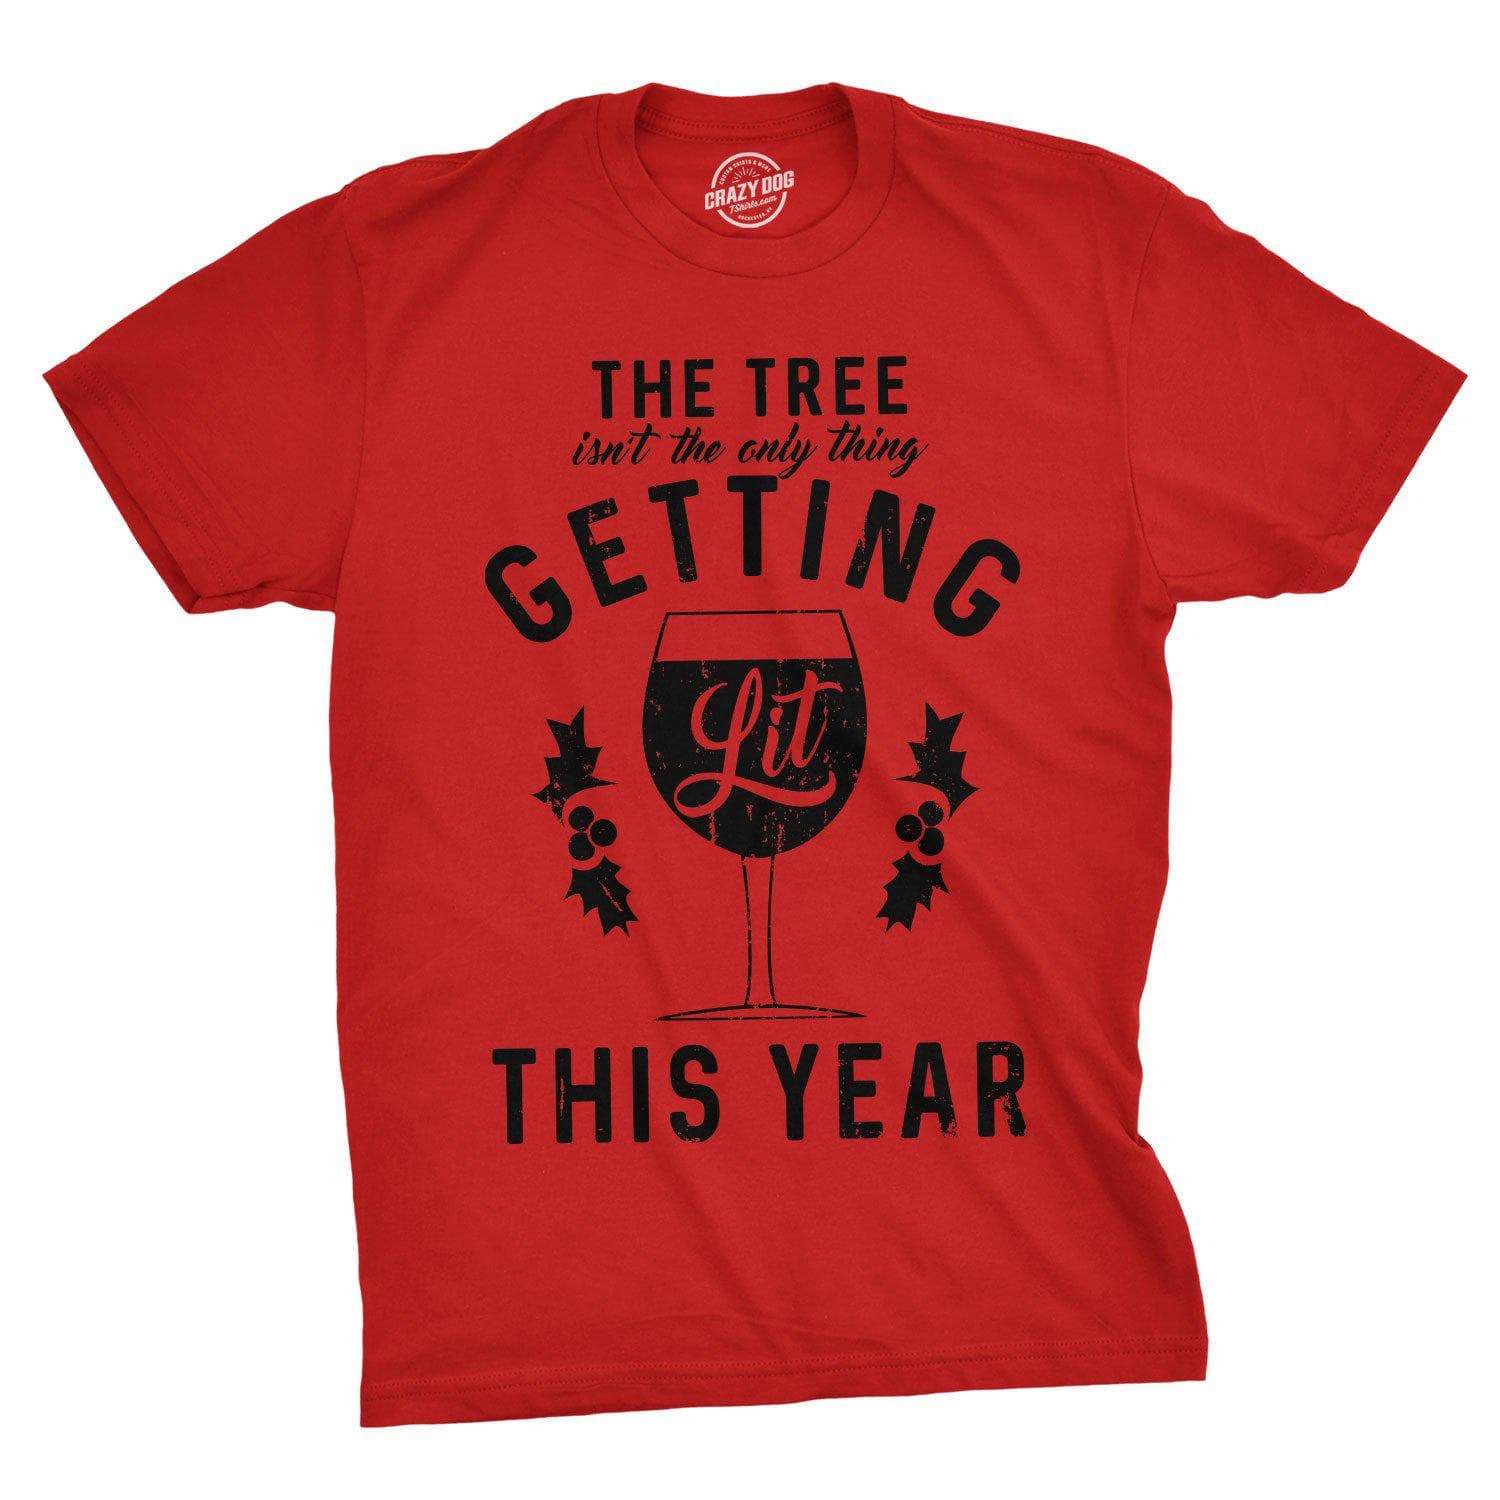 The Tree Isn't The Only Thing Getting Lit This Year Men's Tshirt - Crazy Dog T-Shirts